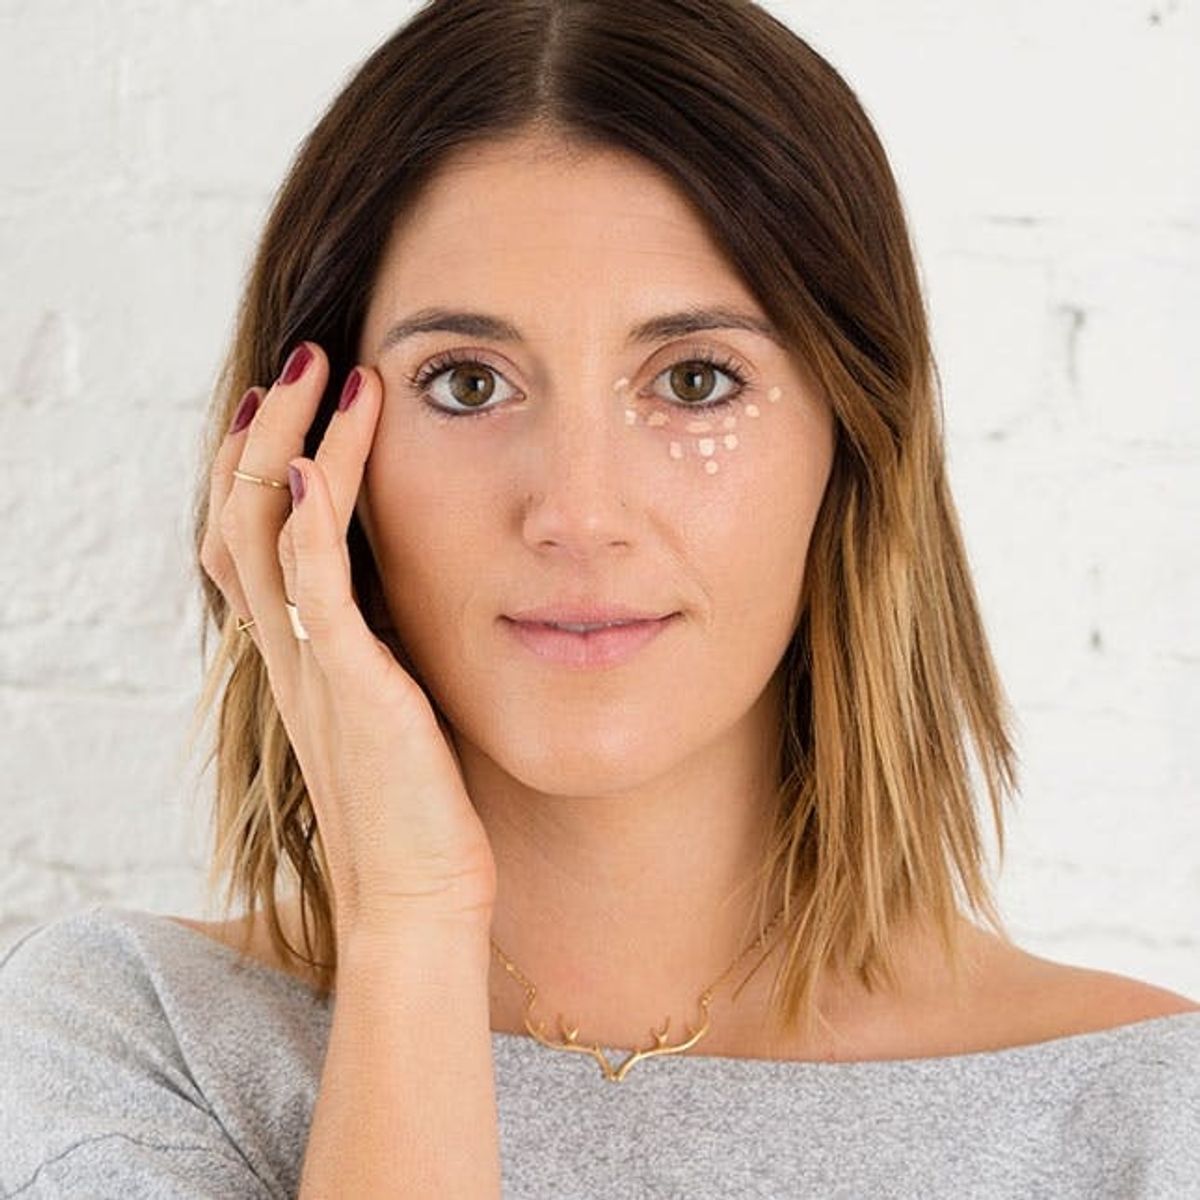 Base Makeup: 4 Steps to Getting a Flawless Face